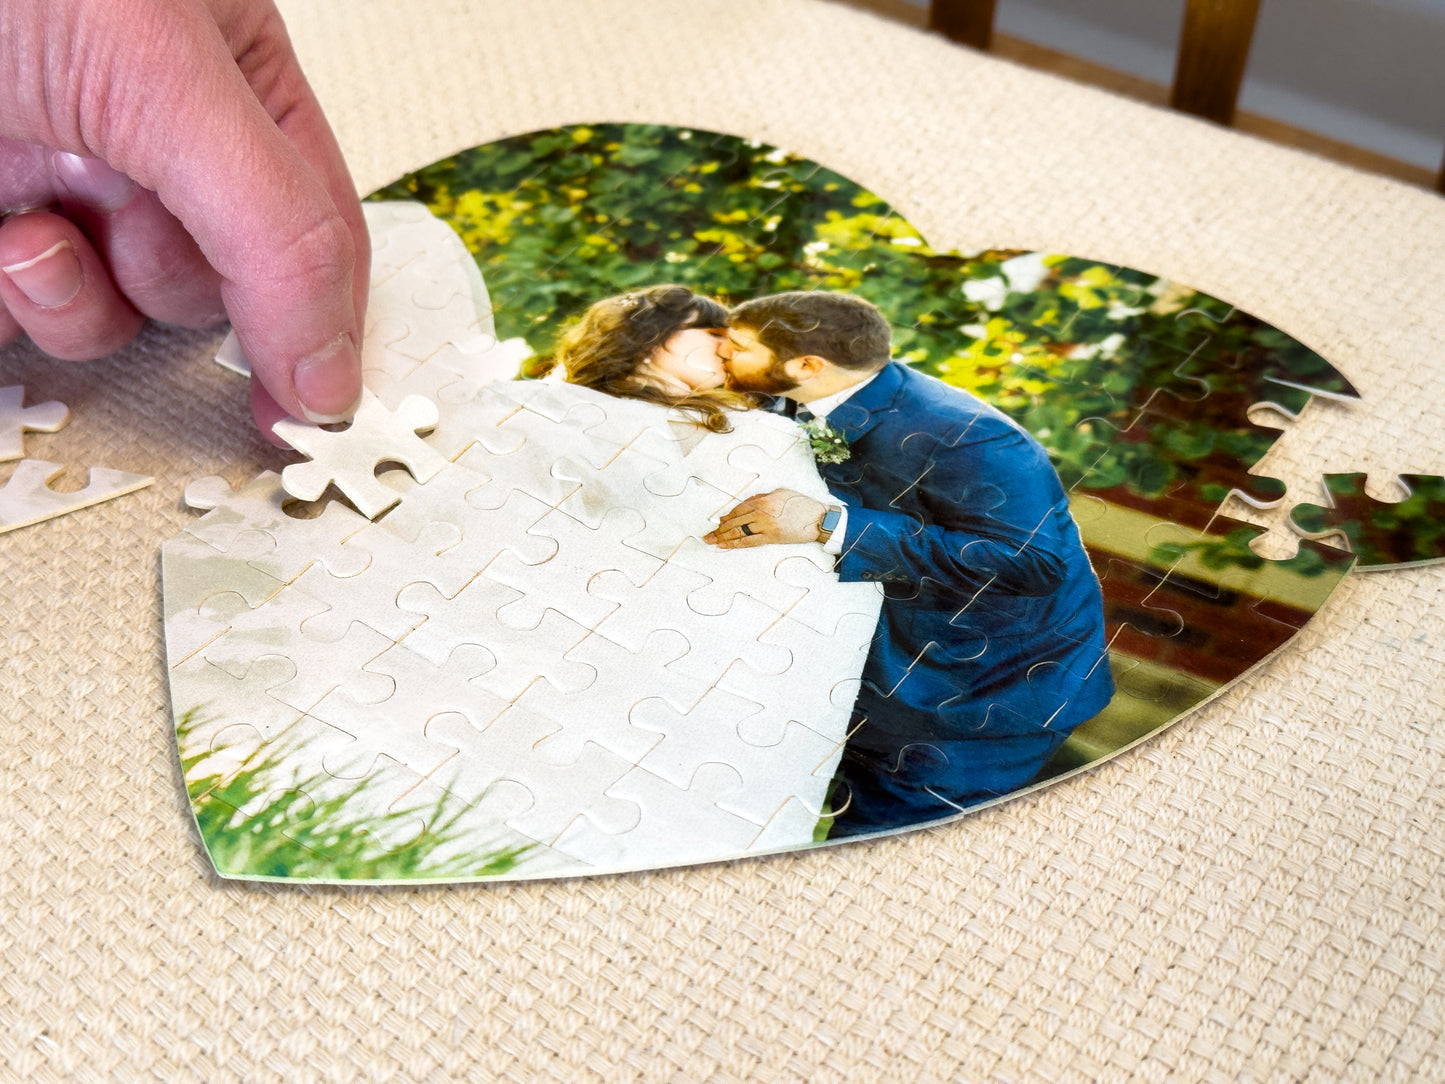 Personalized Heart Puzzle - 75 Pieces